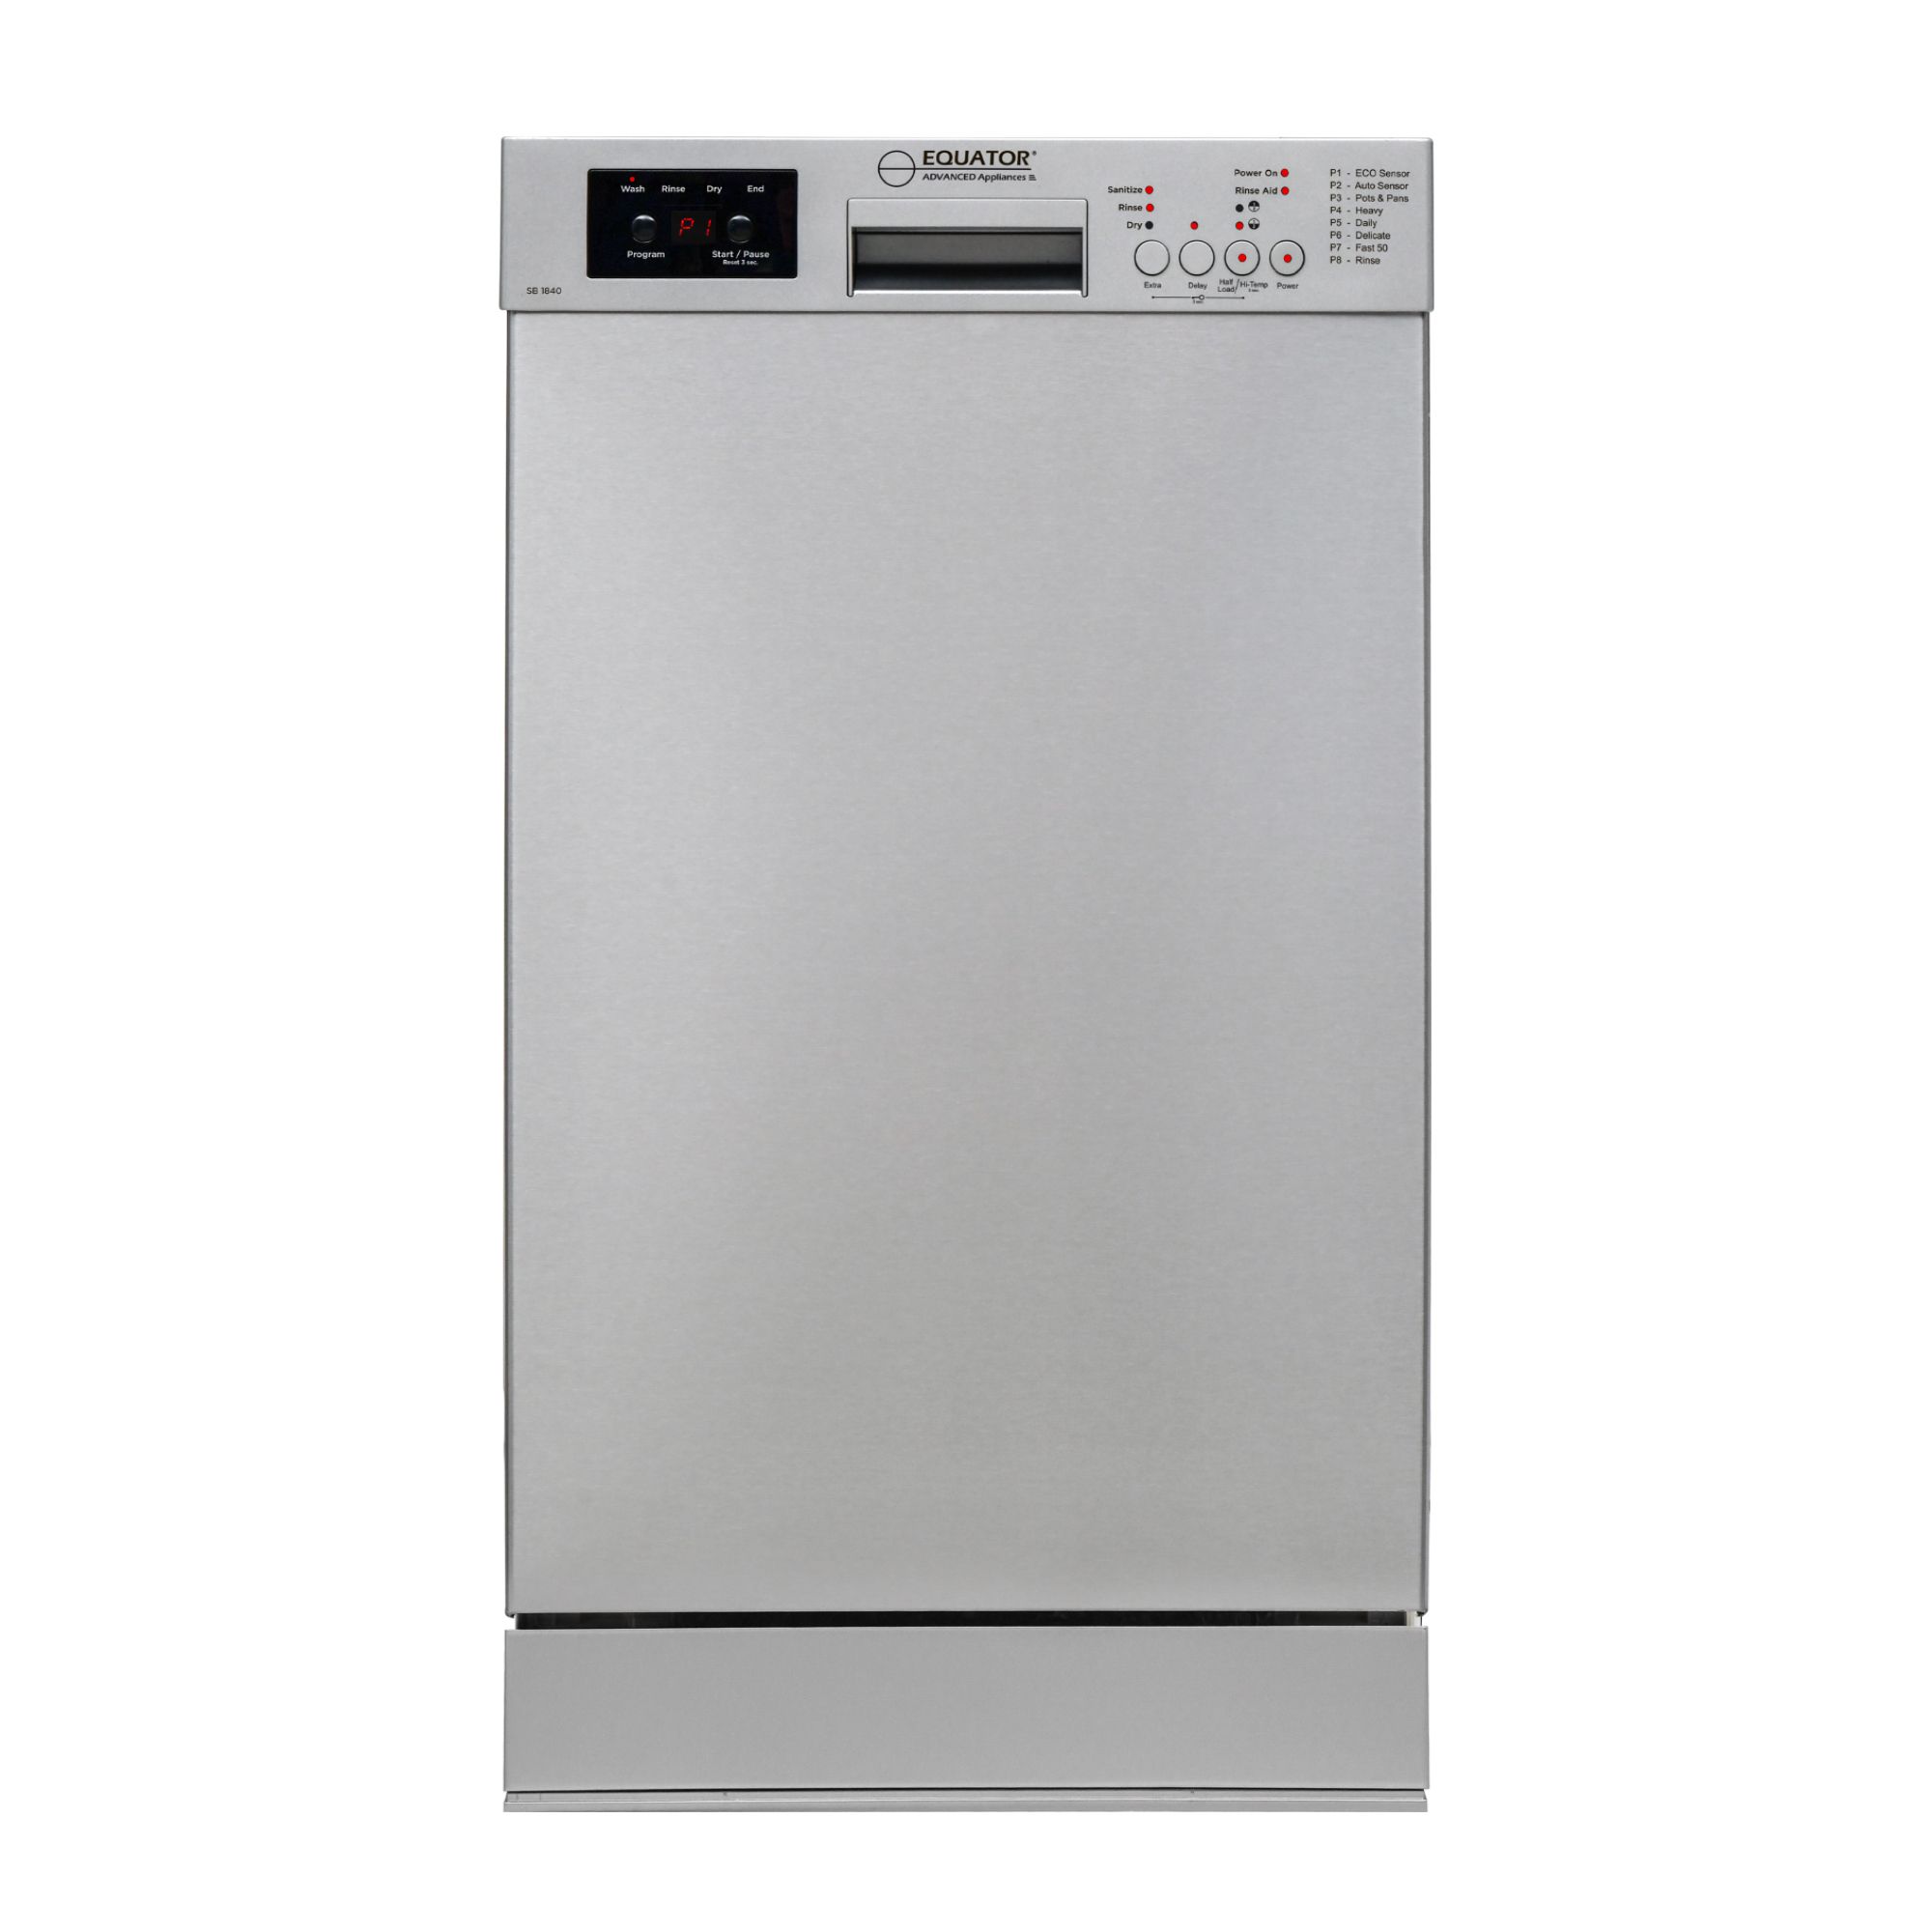 Equator Advanced Appliances SB 1840 Equator 18&' Built-In Dishwasher 8 Place Settings & 8 Wash Programs in Stainless